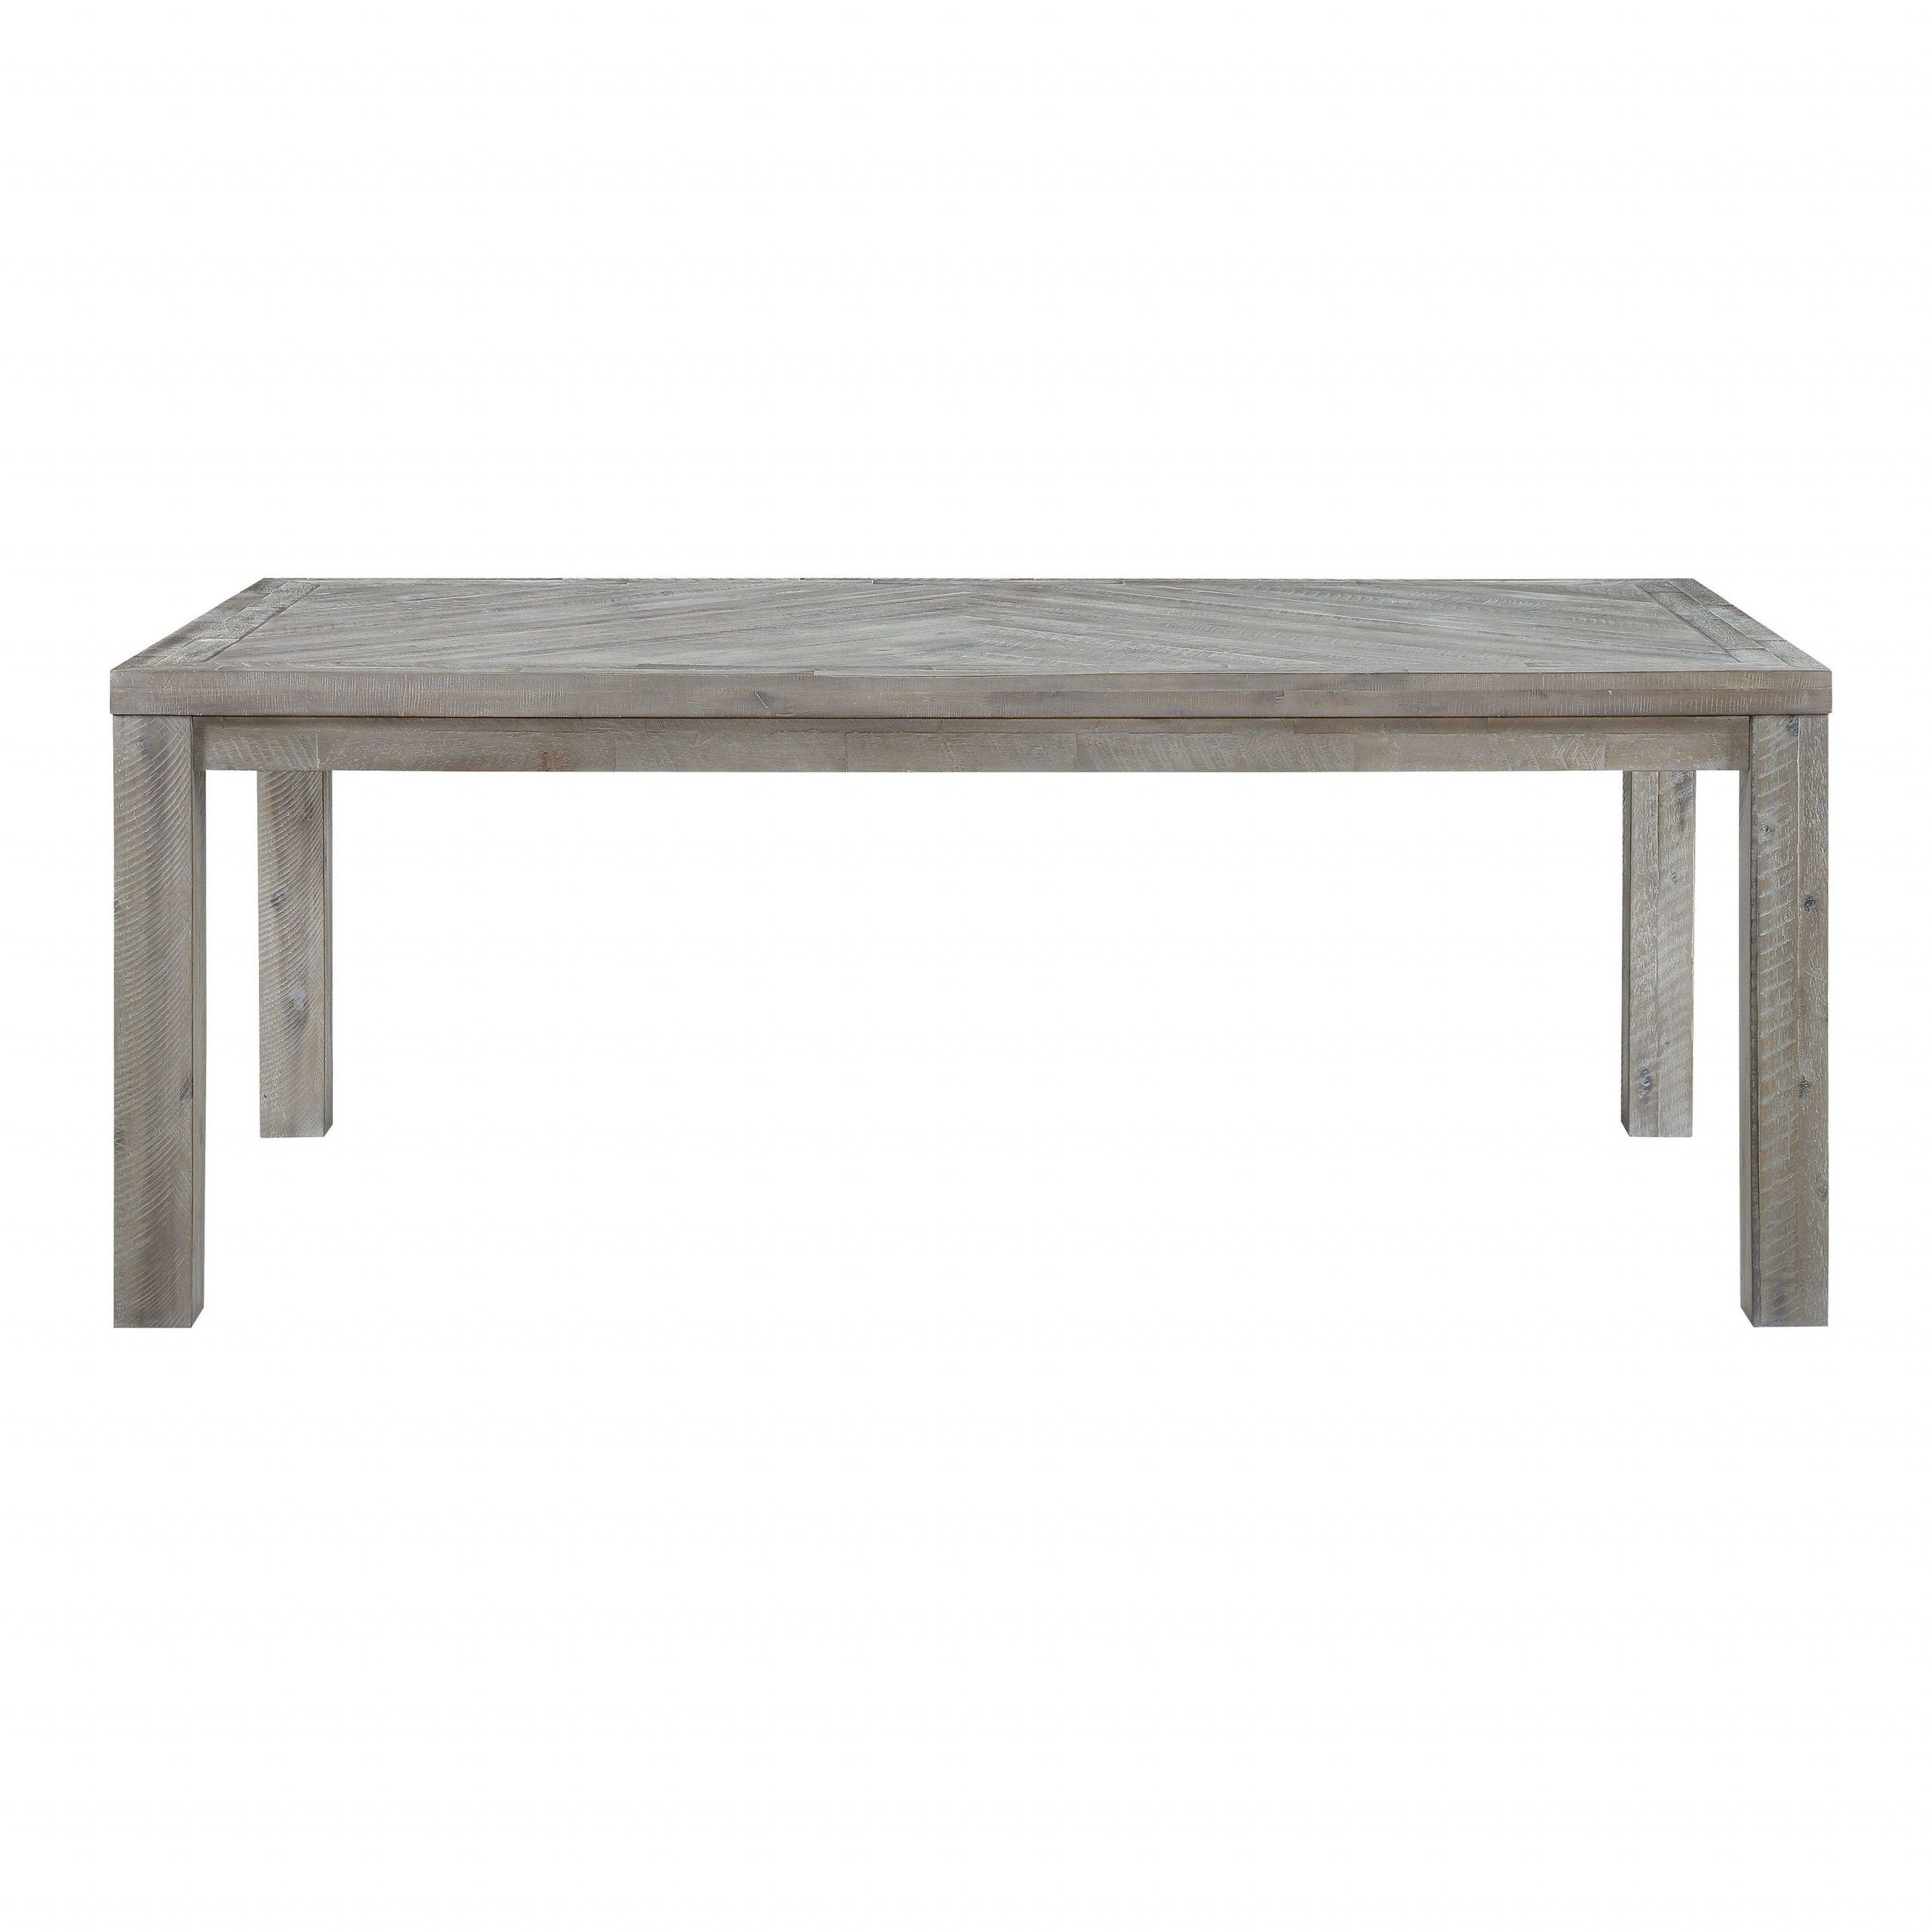 Menlo Reclaimed Wood Extending Dining Tables With Regard To 2019 The Gray Barn Daybreak Solid Wood Rectangular Dining Table In Rustic Latte (View 3 of 25)